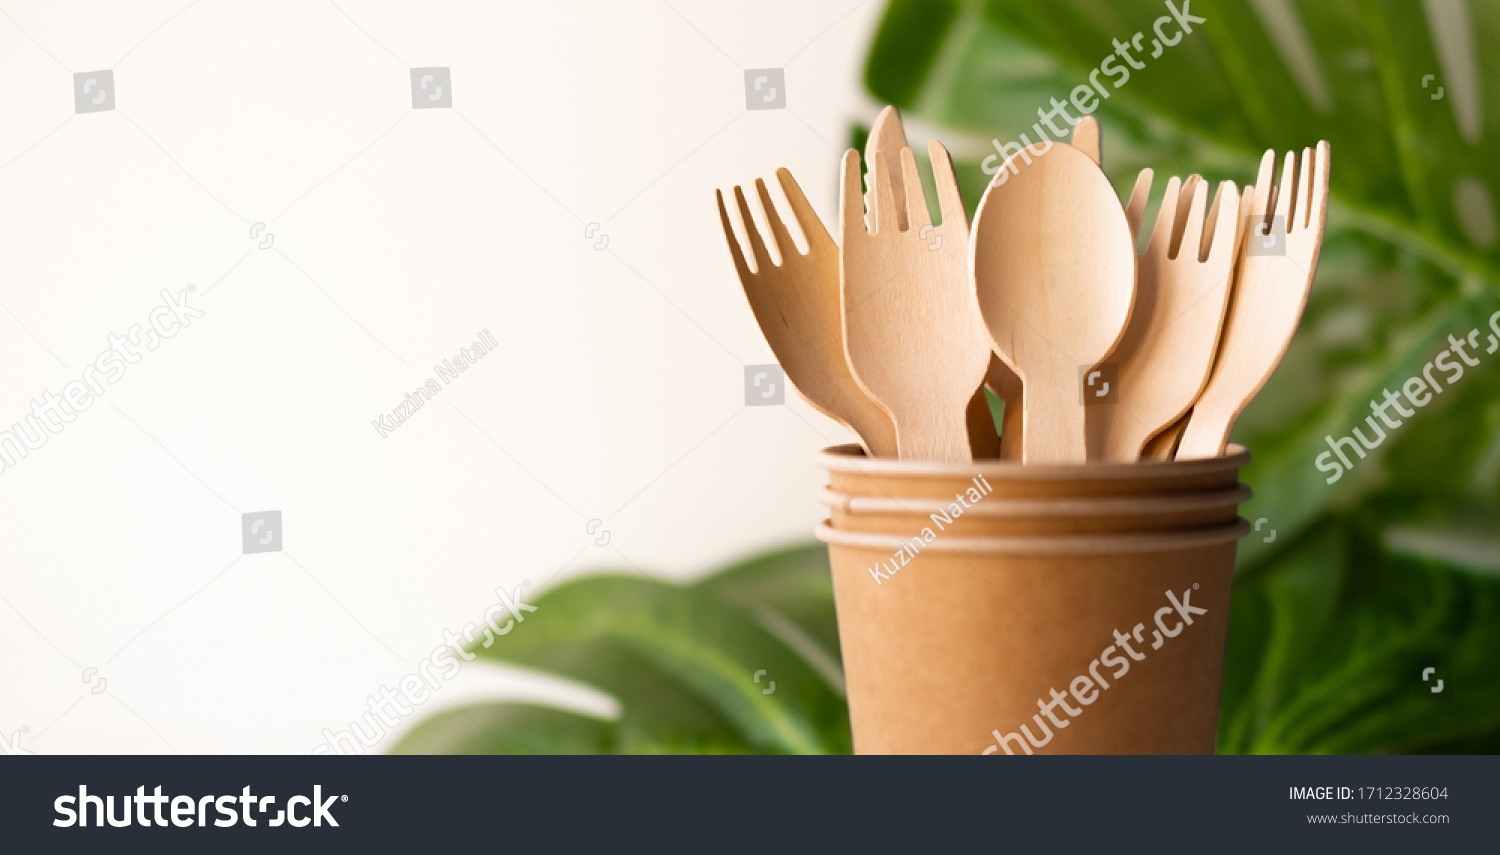 bunner eco friendly disposable kitchenware utensils on white background. wooden forks and spoons in paper cup. and green leaf. ecology, zero waste concept. copyspace. #1712328604